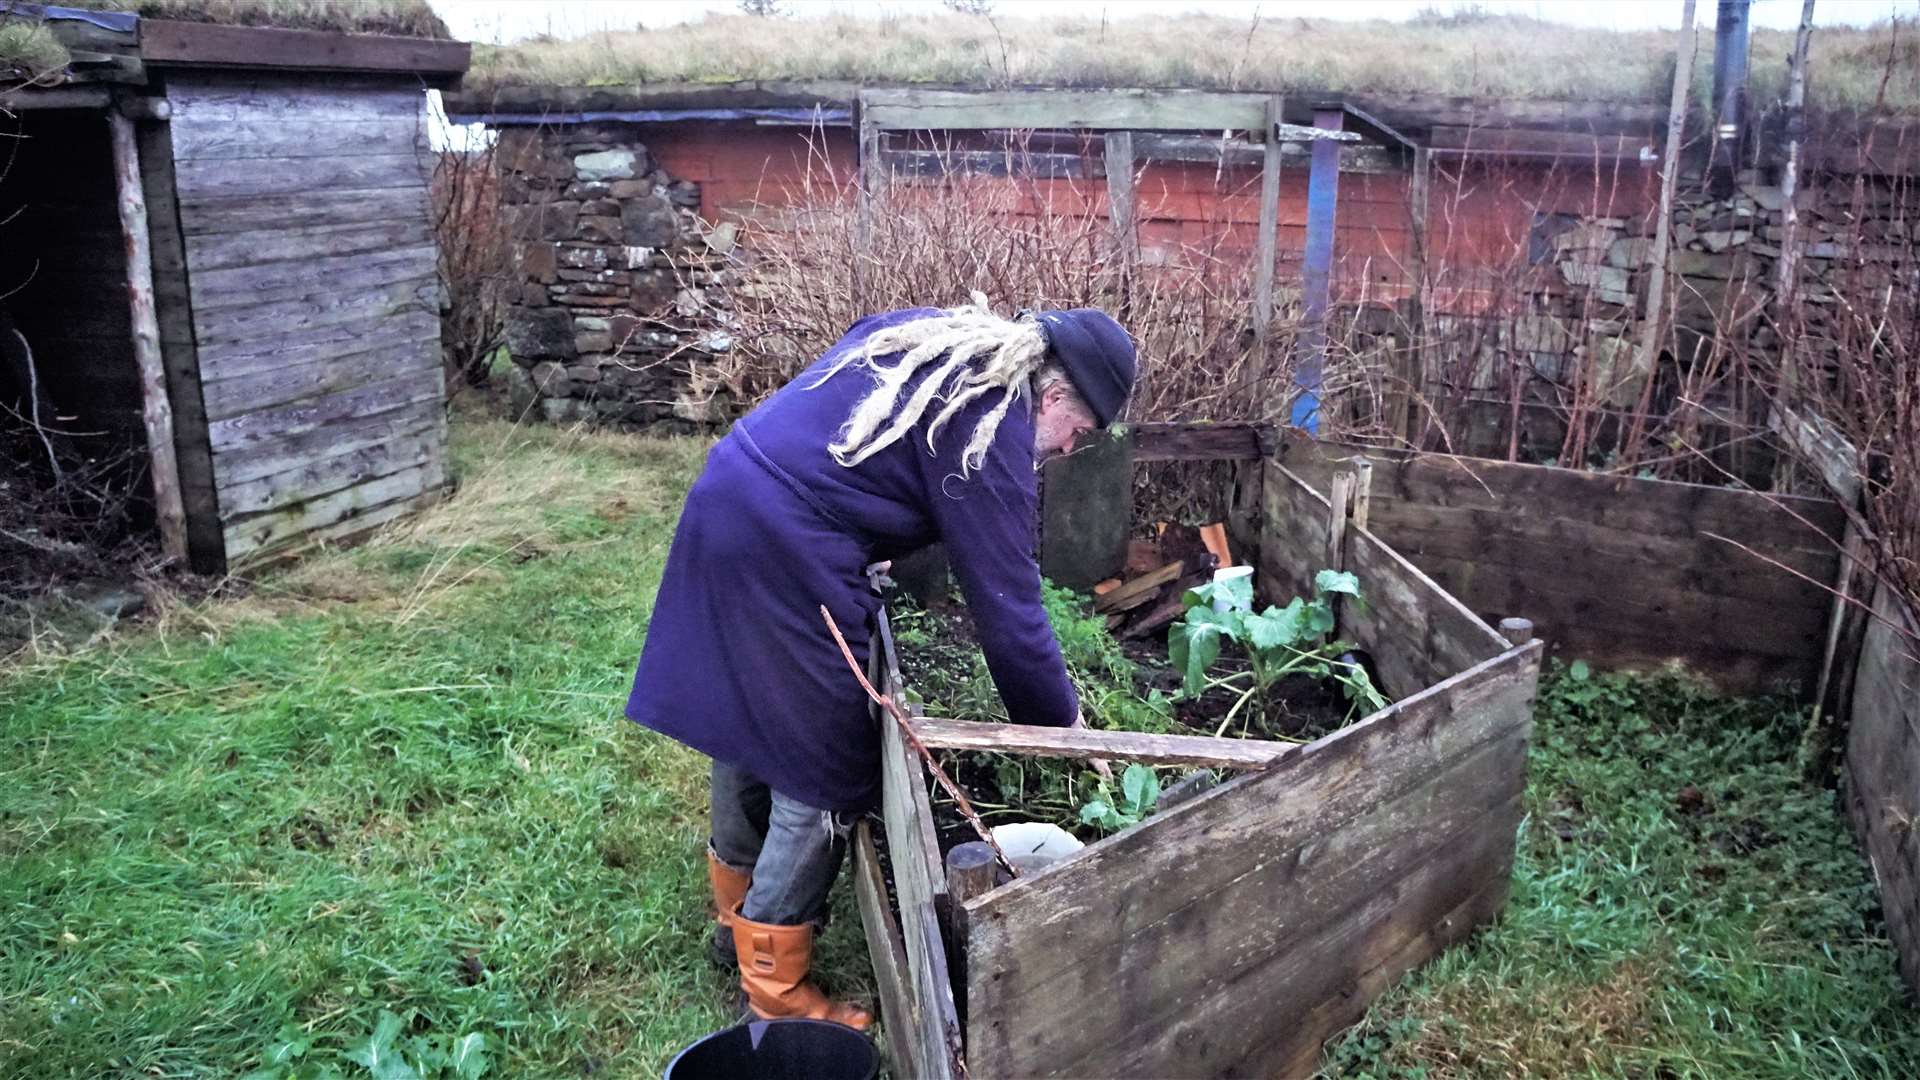 Marcus tends to a vegetable patch outside his home. Picture: DGS